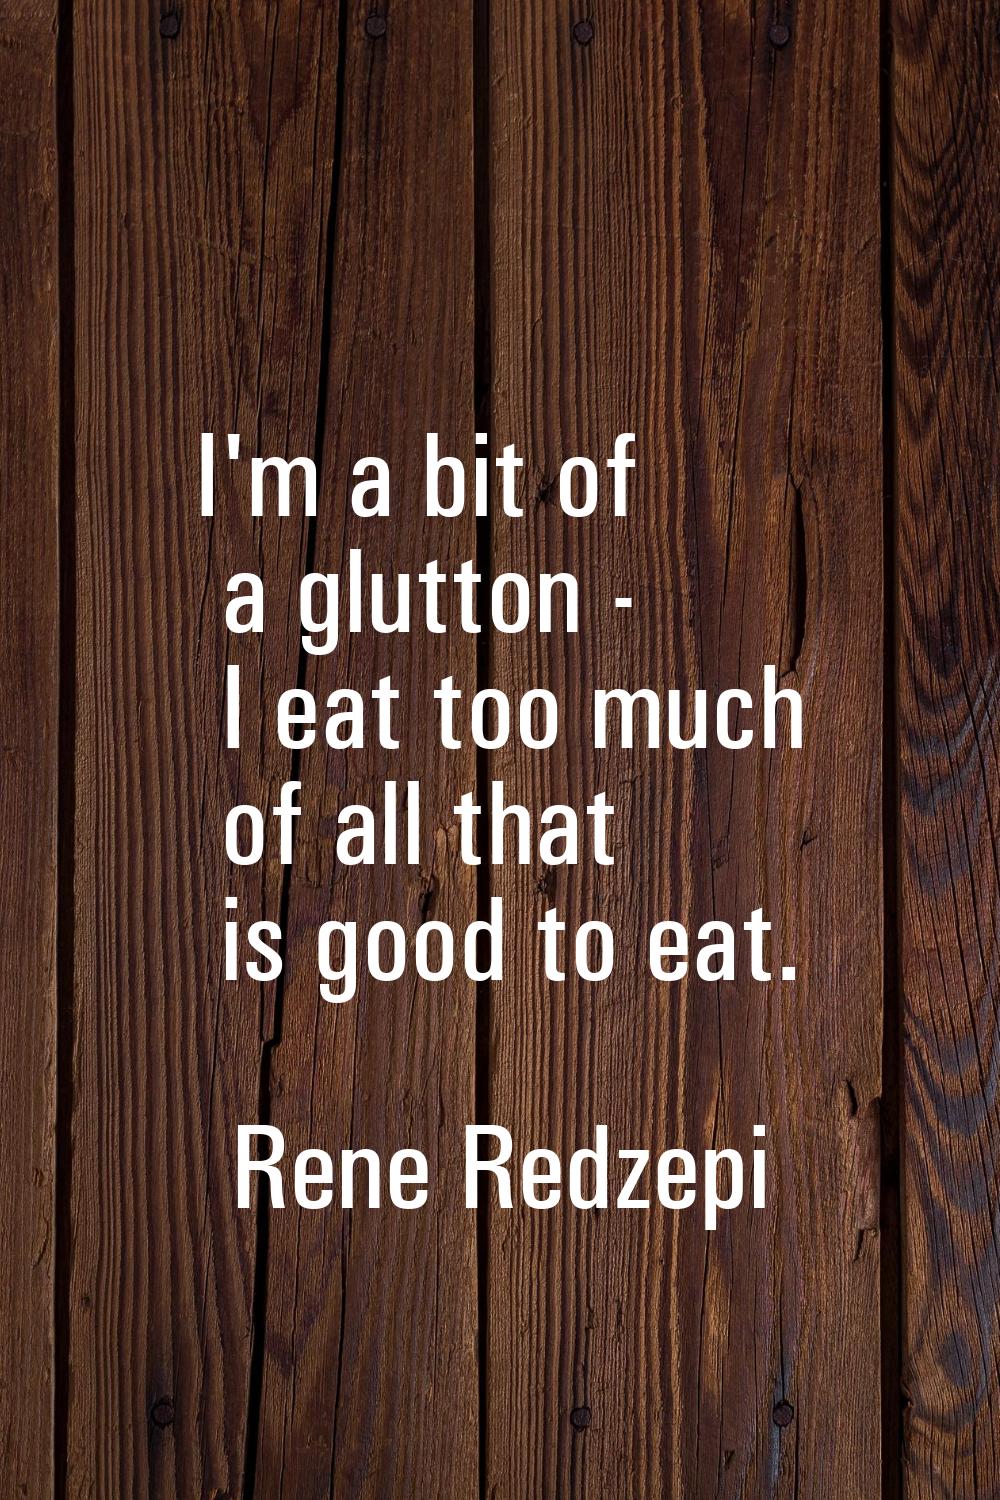 I'm a bit of a glutton - I eat too much of all that is good to eat.